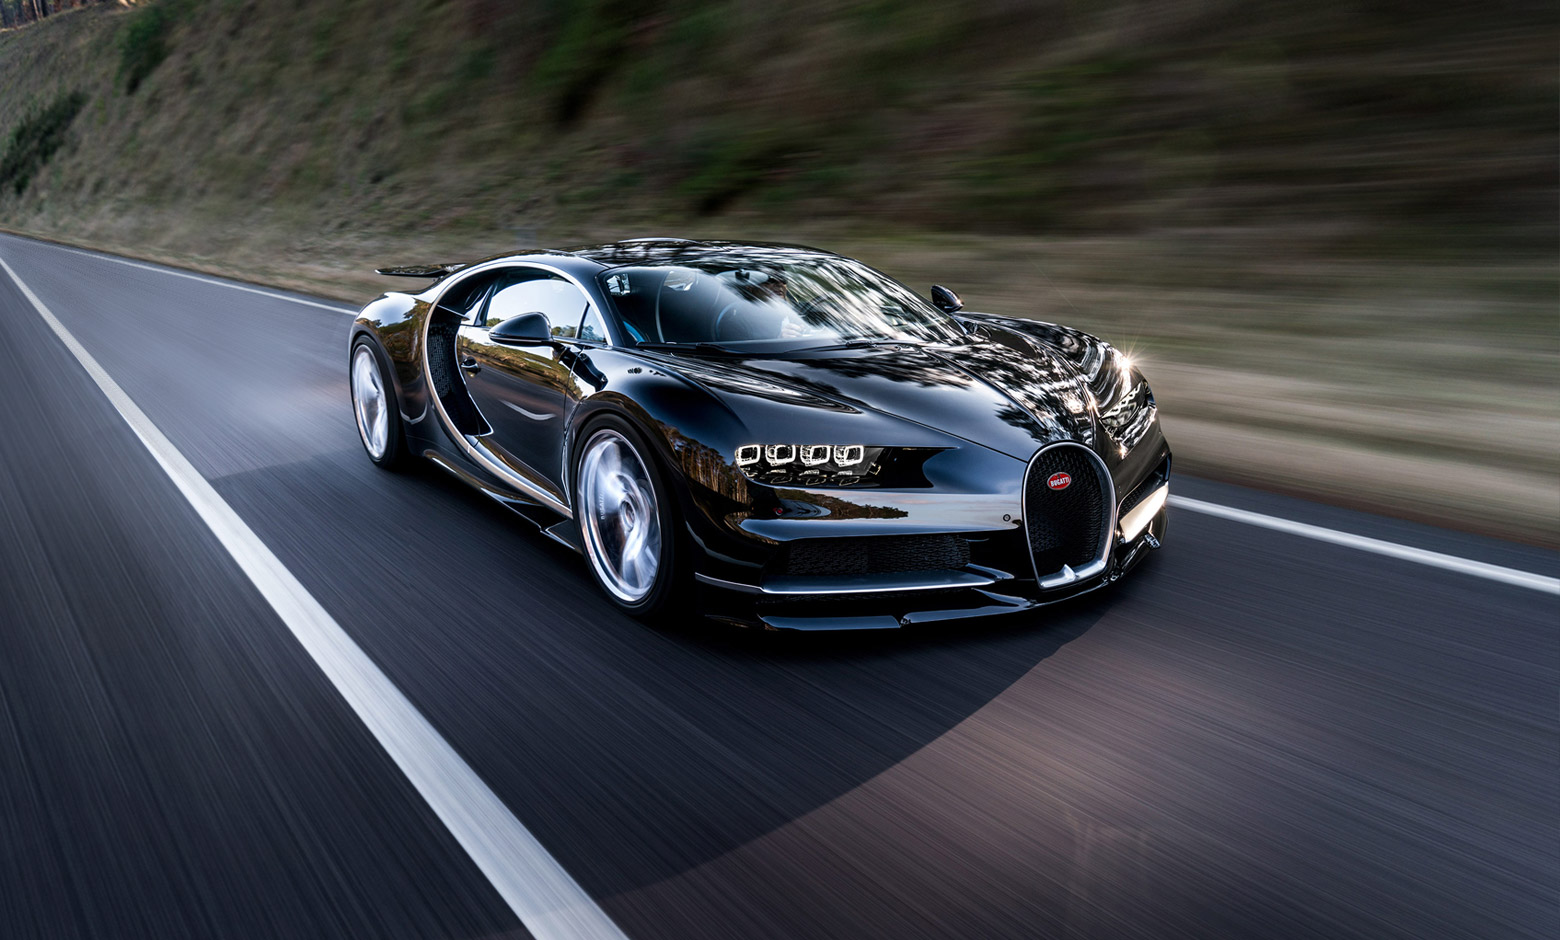 10 most powerful cars in the world - Bugatti Chiron 